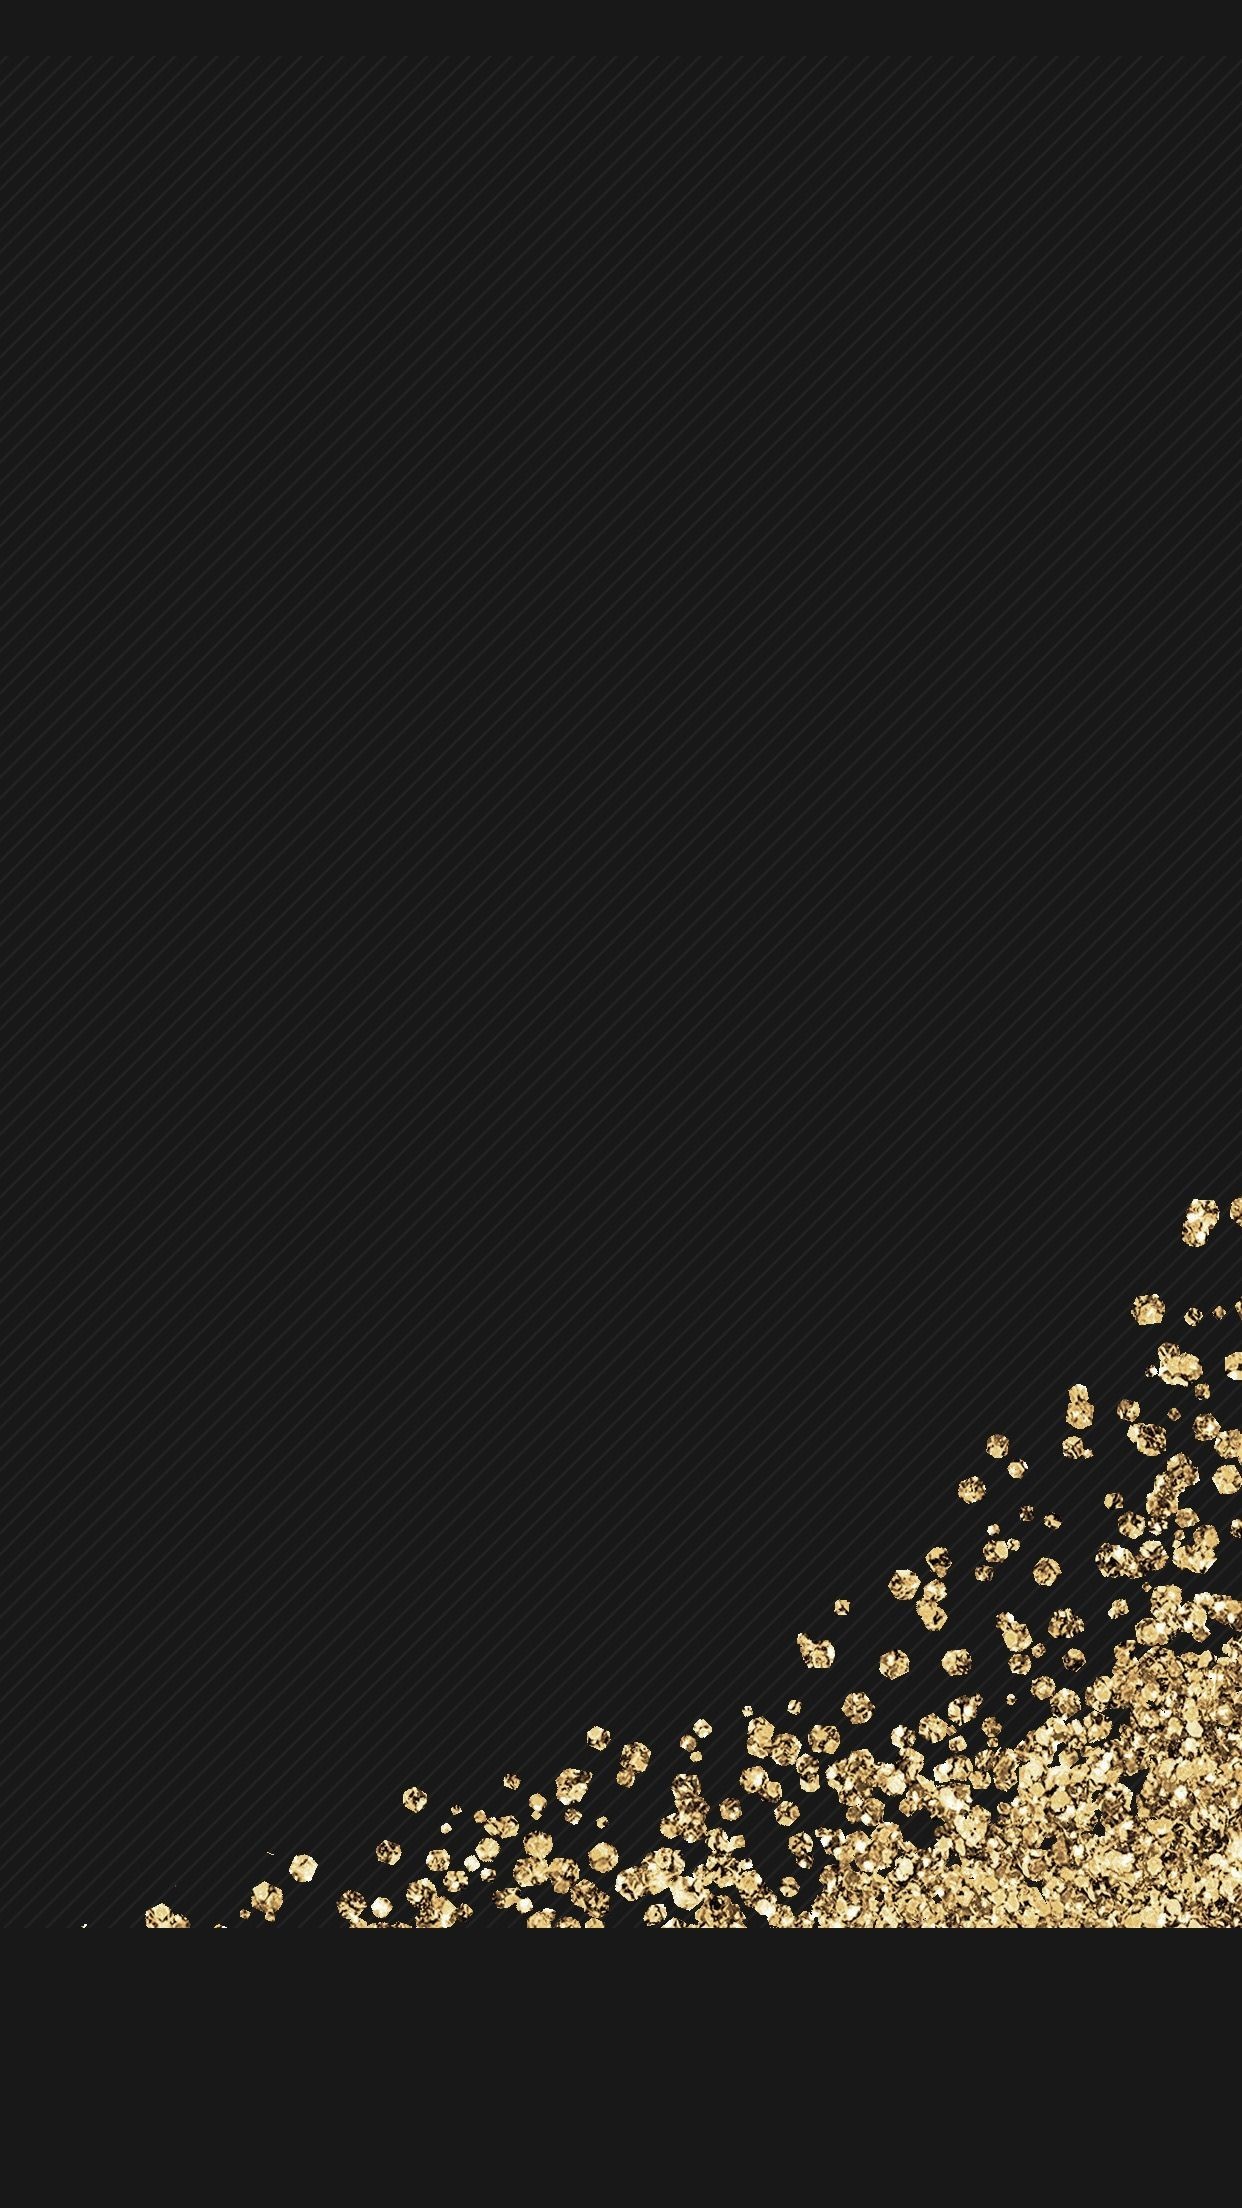 1242x2208 1920x1200 Gold Glitter Wallpapers Free Download .